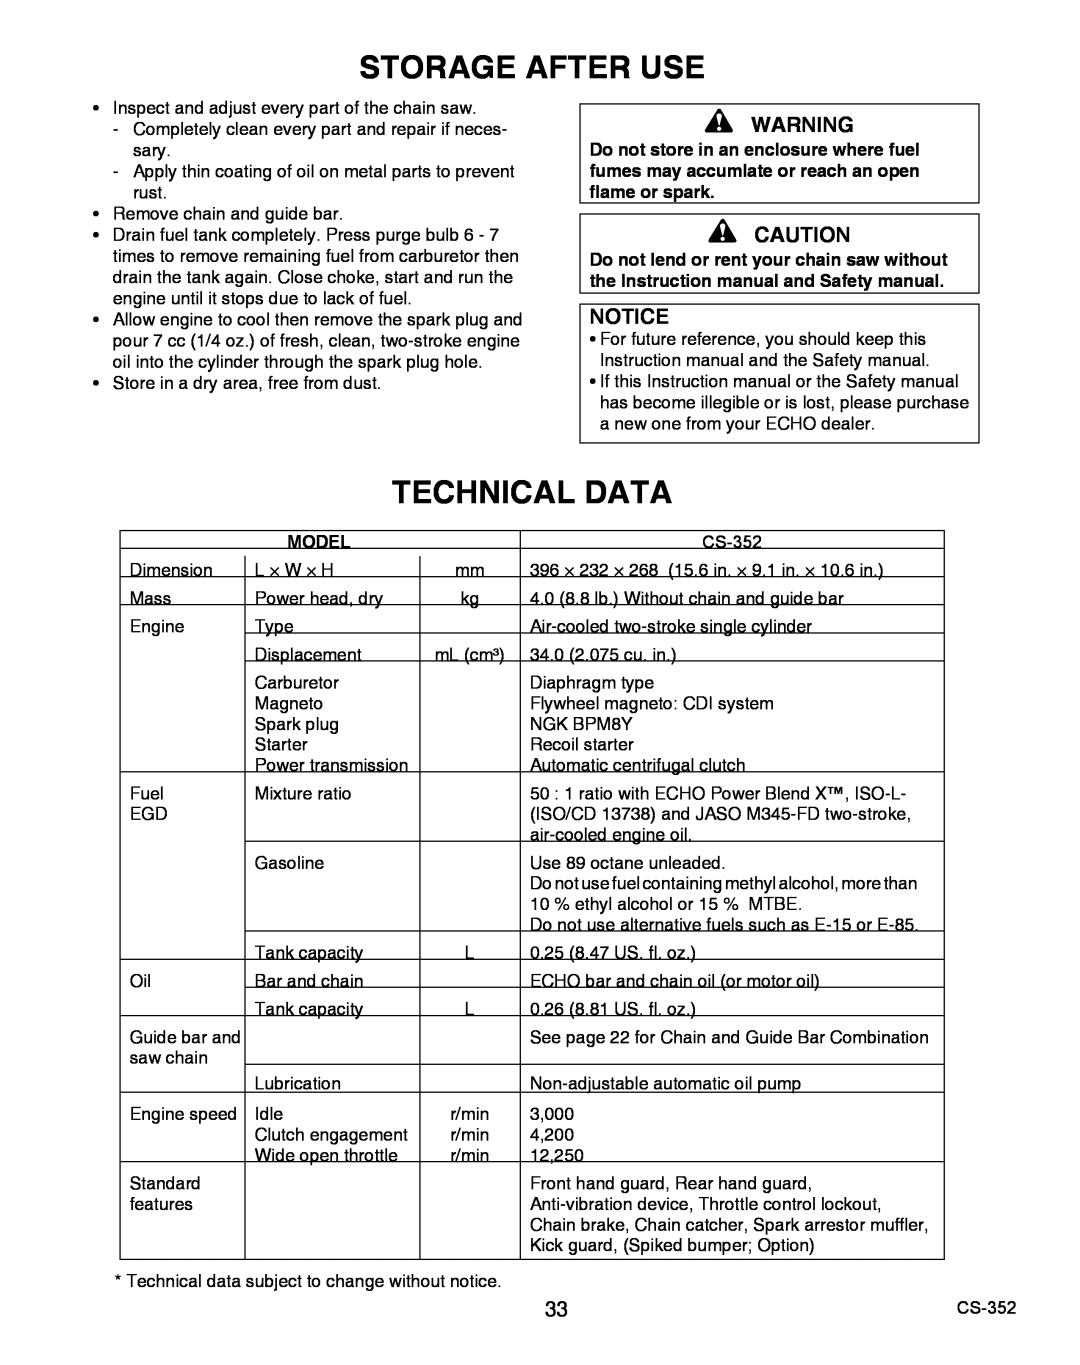 Echo X750020201 instruction manual Storage After Use, Technical Data 